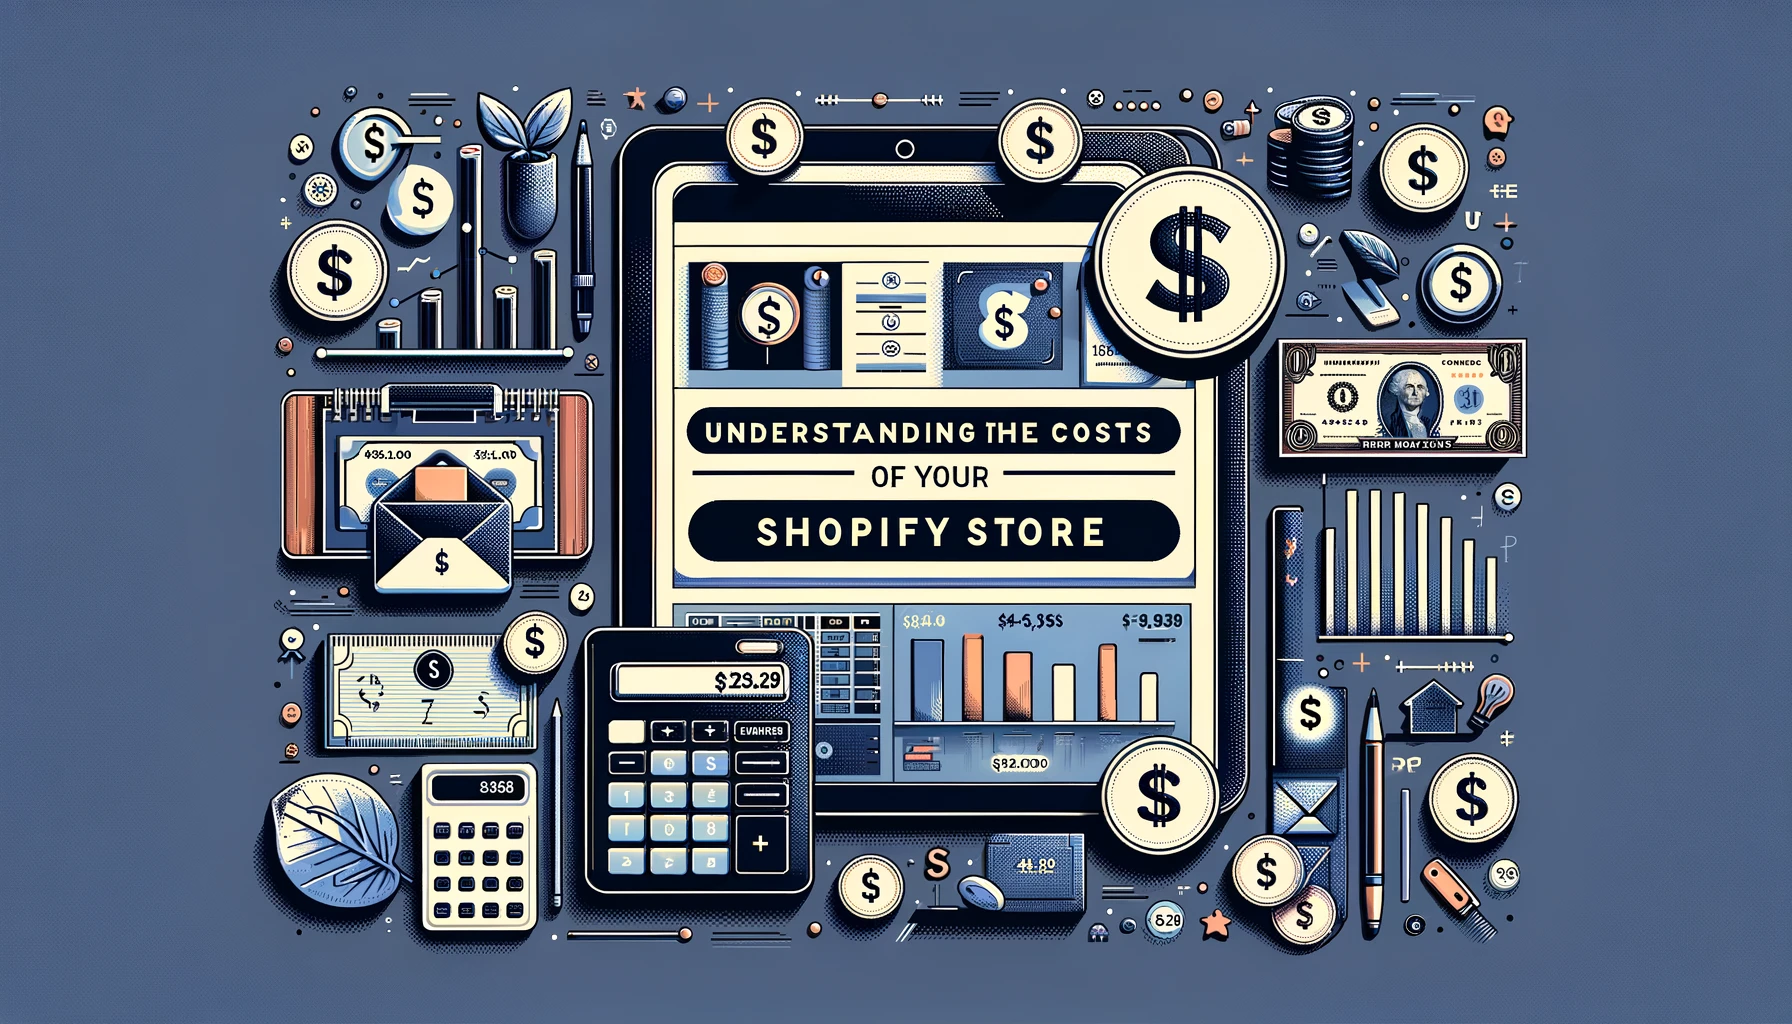 Shopify Costs